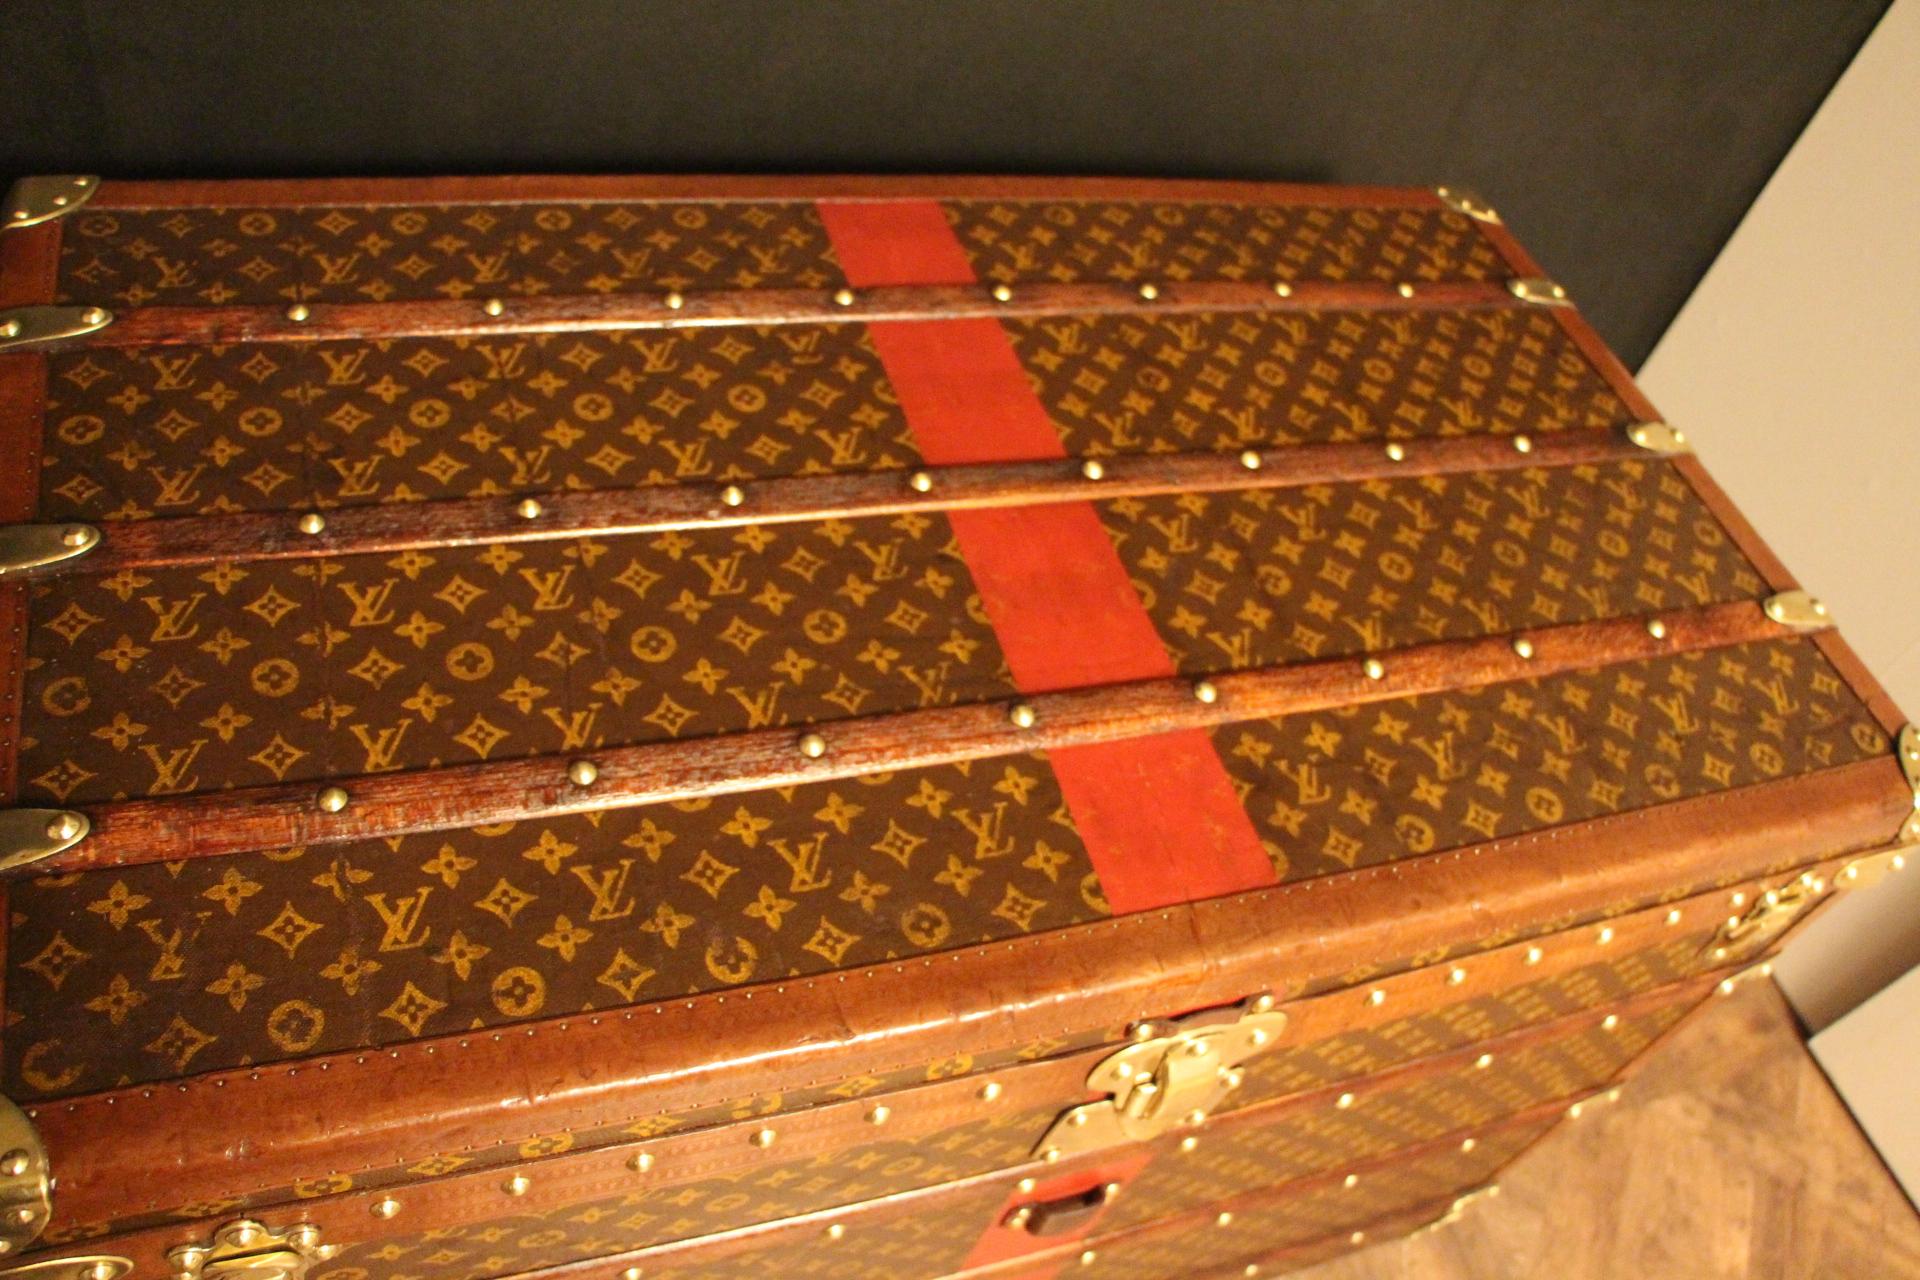 This superb Louis Vuitton steamer trunk features stenciled monogram canvas,honey color lozine trim, LV stamped solid brass locks and studs as well as leather side handles and brass corners. Its customized painted French flag on its sides as well as